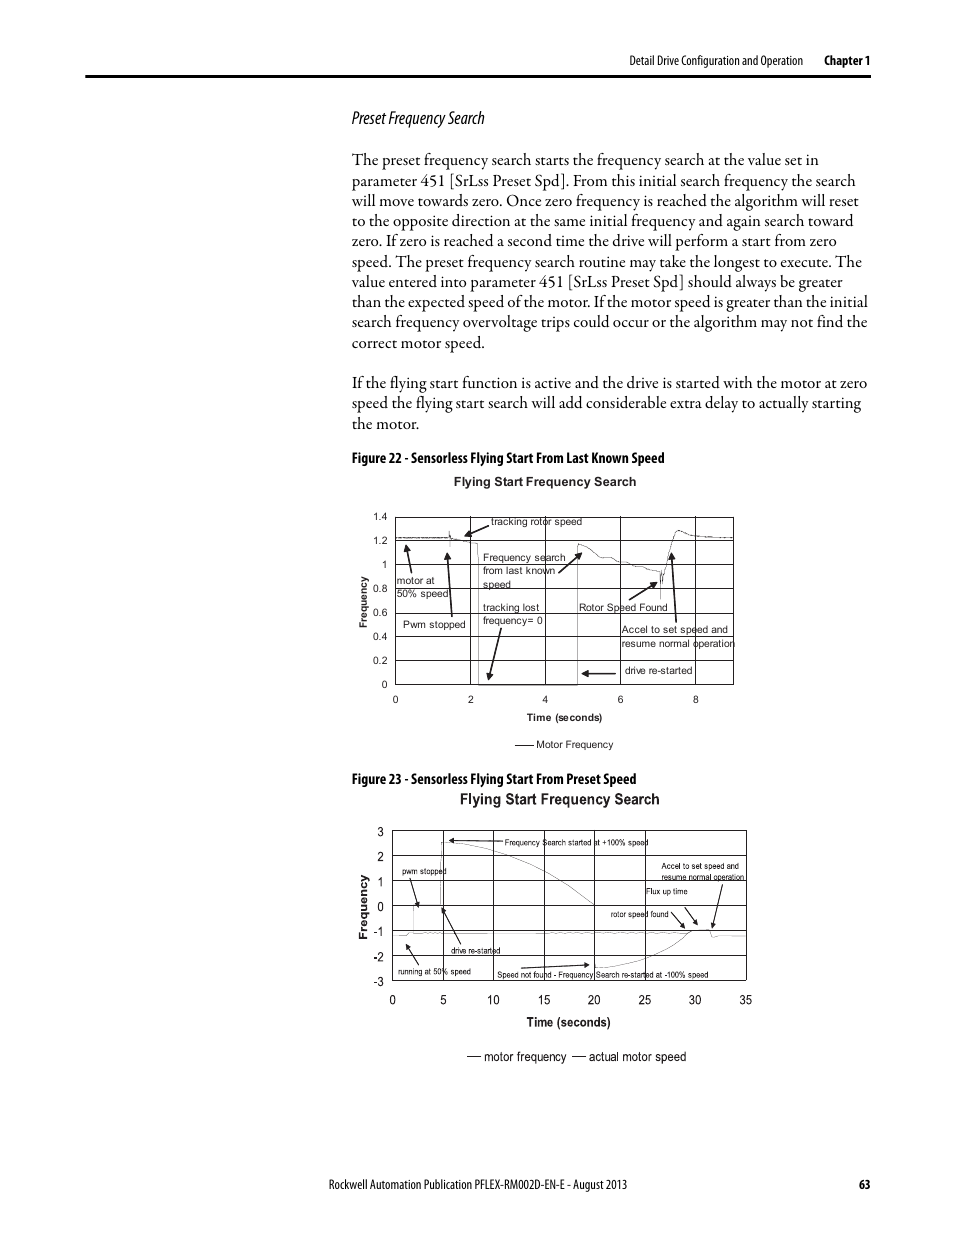 Preset frequency search | Rockwell Automation 20D PowerFlex 700S with Phase I Control Reference Manual User Manual | Page 63 / 190